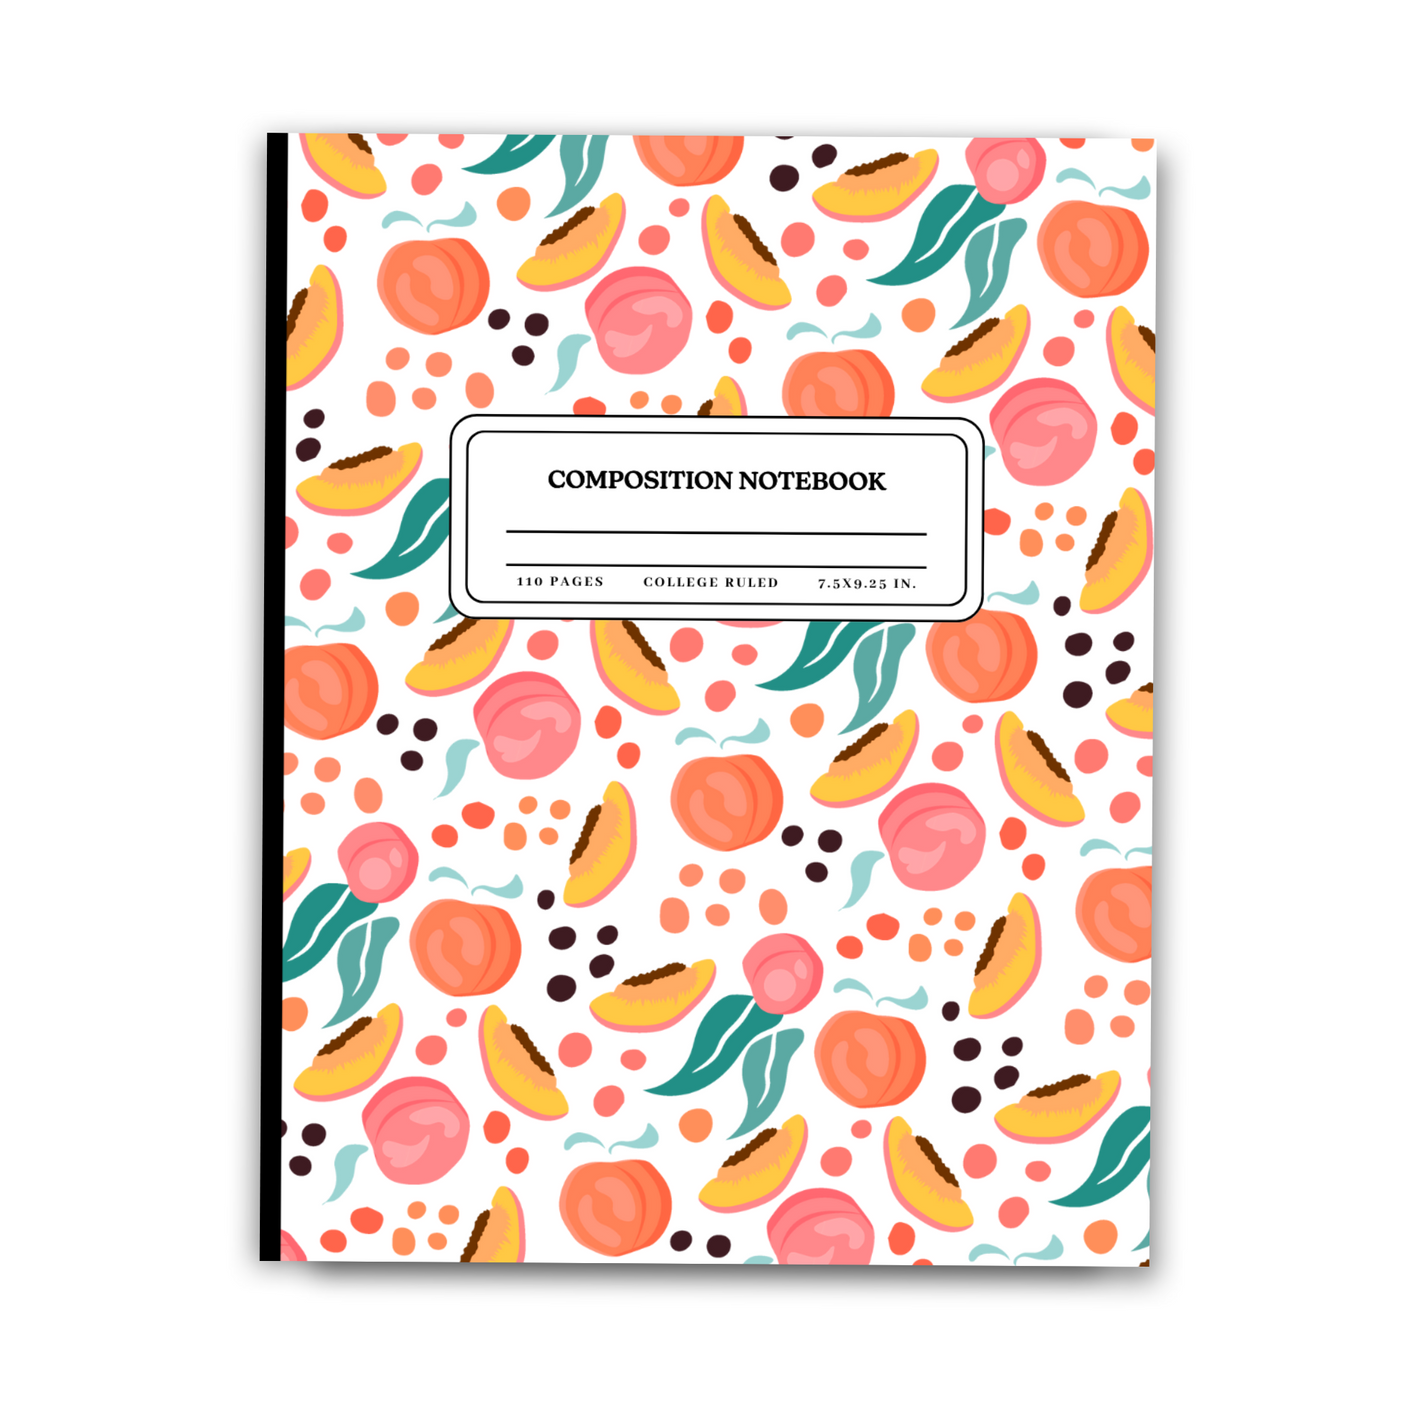 Composition notebook for school study notes, planning and documenting important events or tasks